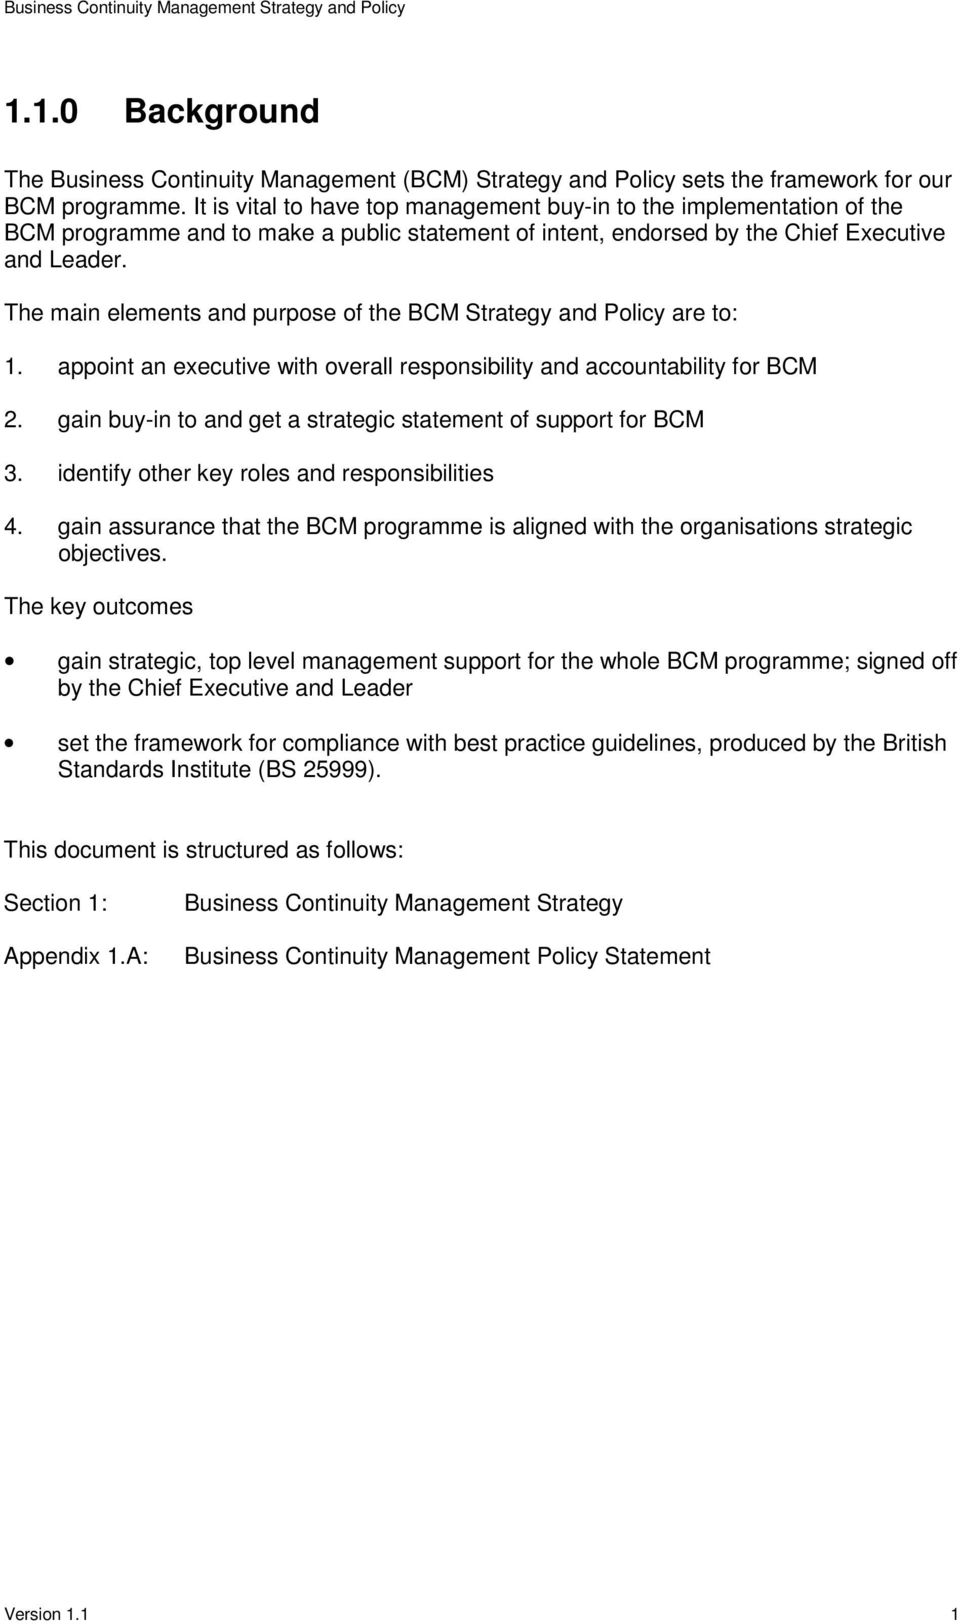 The main elements and purpose of the BCM Strategy and Policy are to: 1. appoint an executive with overall responsibility and accountability for BCM 2.